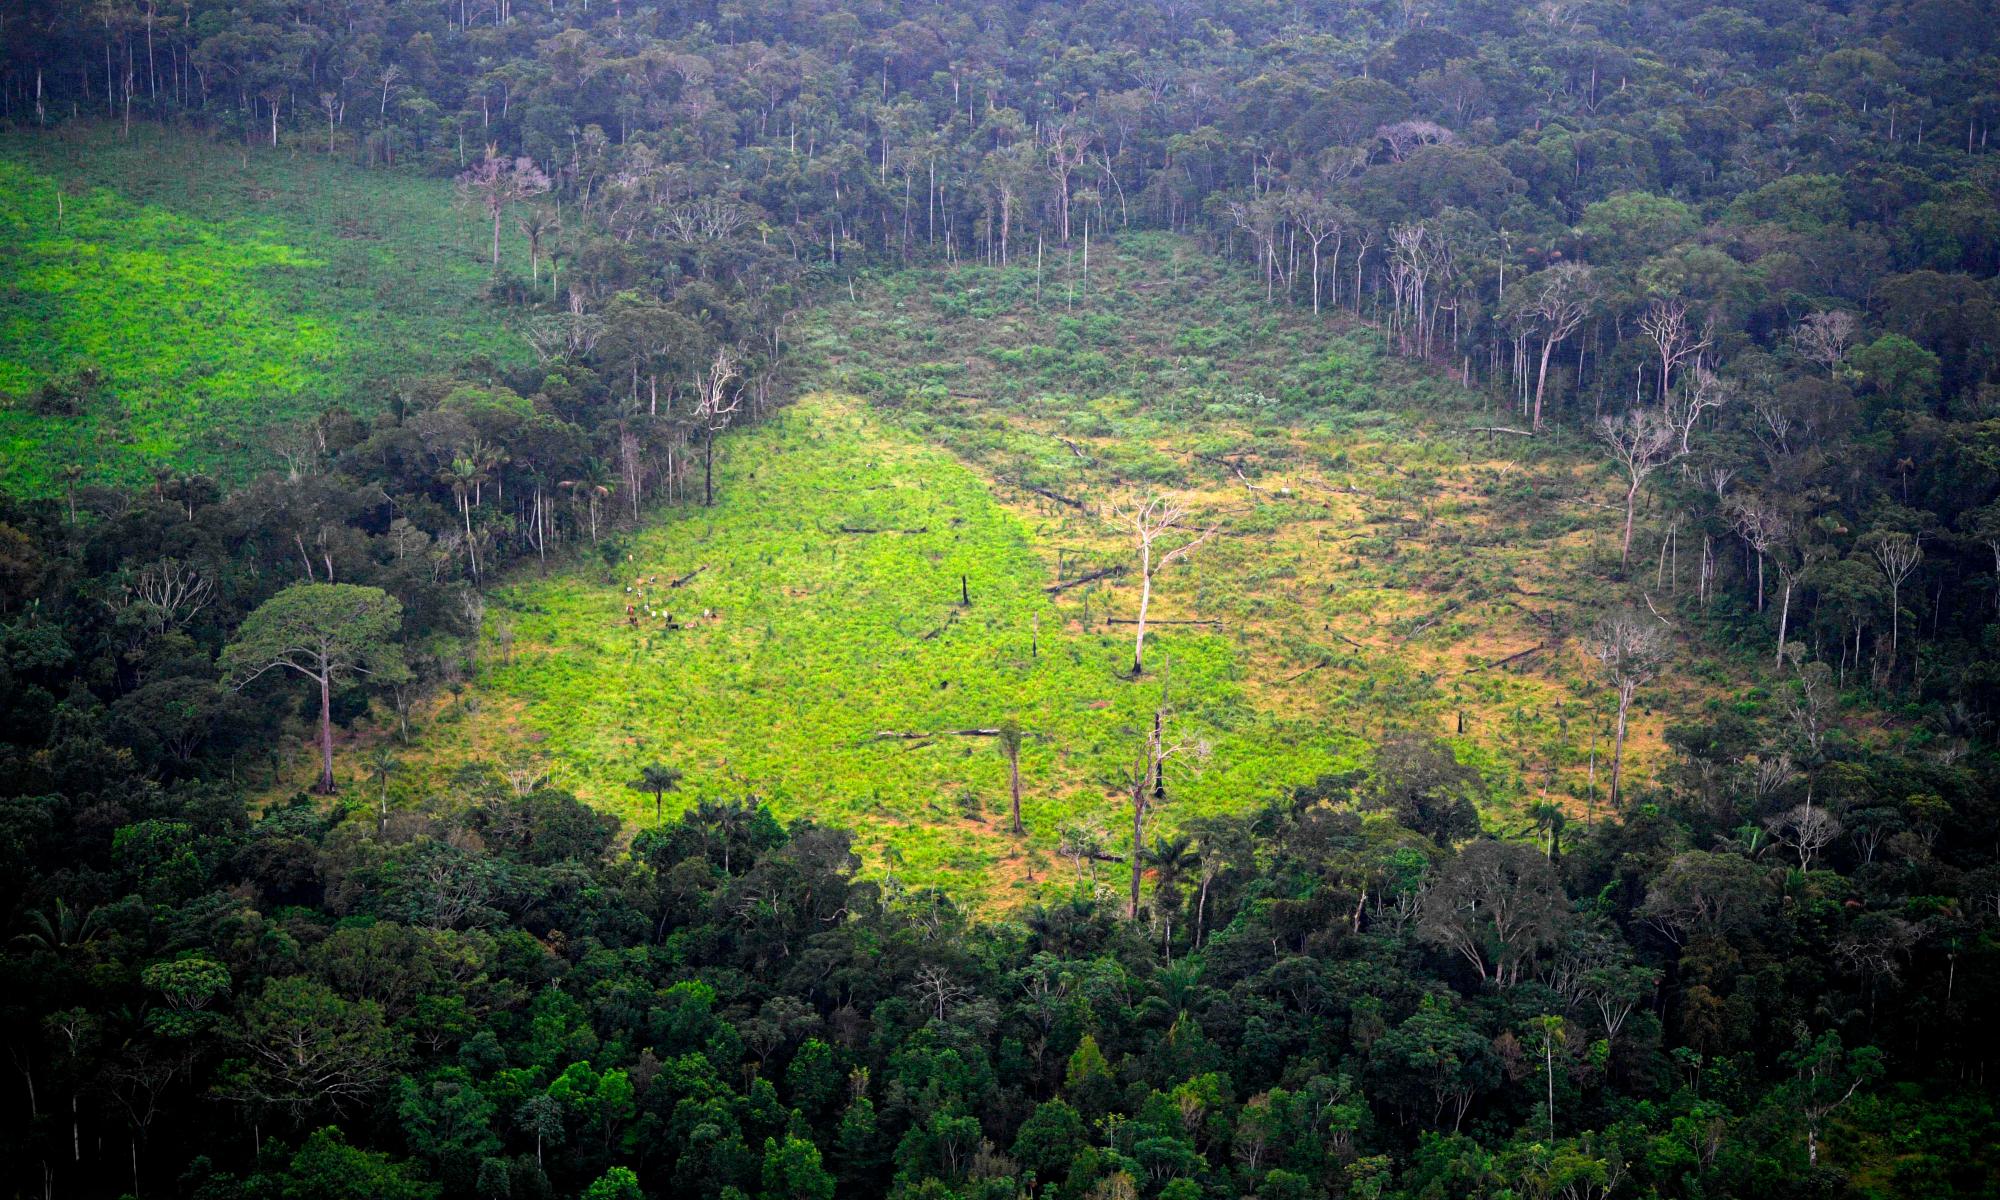 Swapping 20% of beef for microbial protein ‘could halve deforestation’